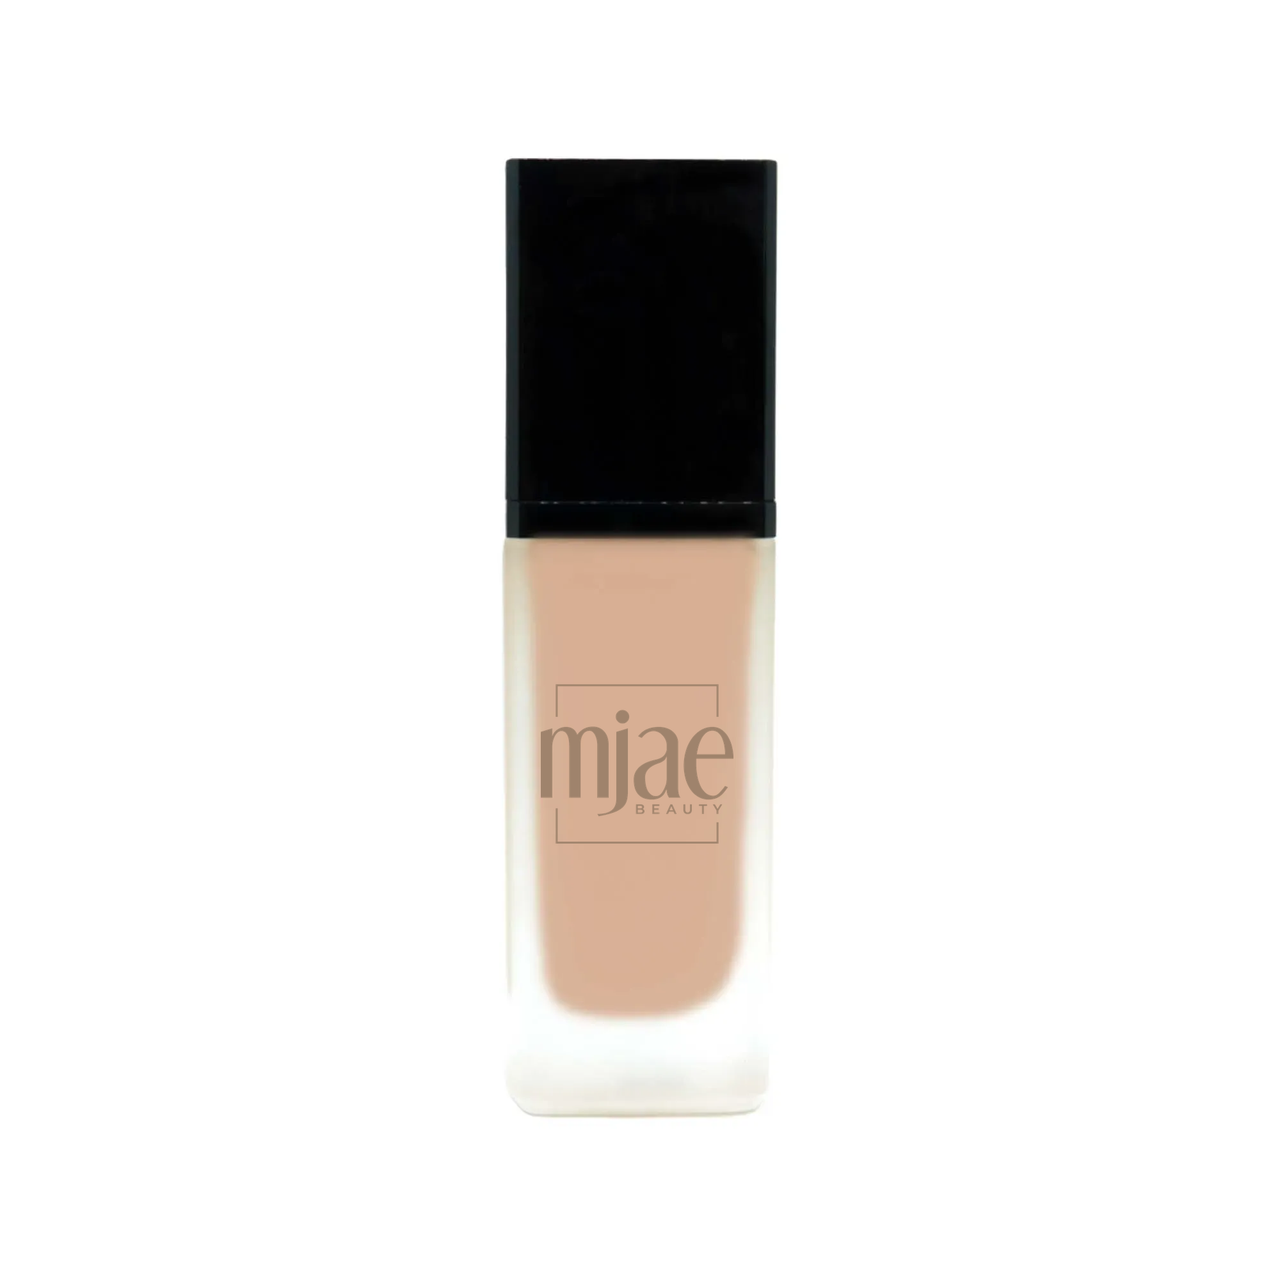 Mjae Foundation with SPF - Warm Nude - Clean Beauty